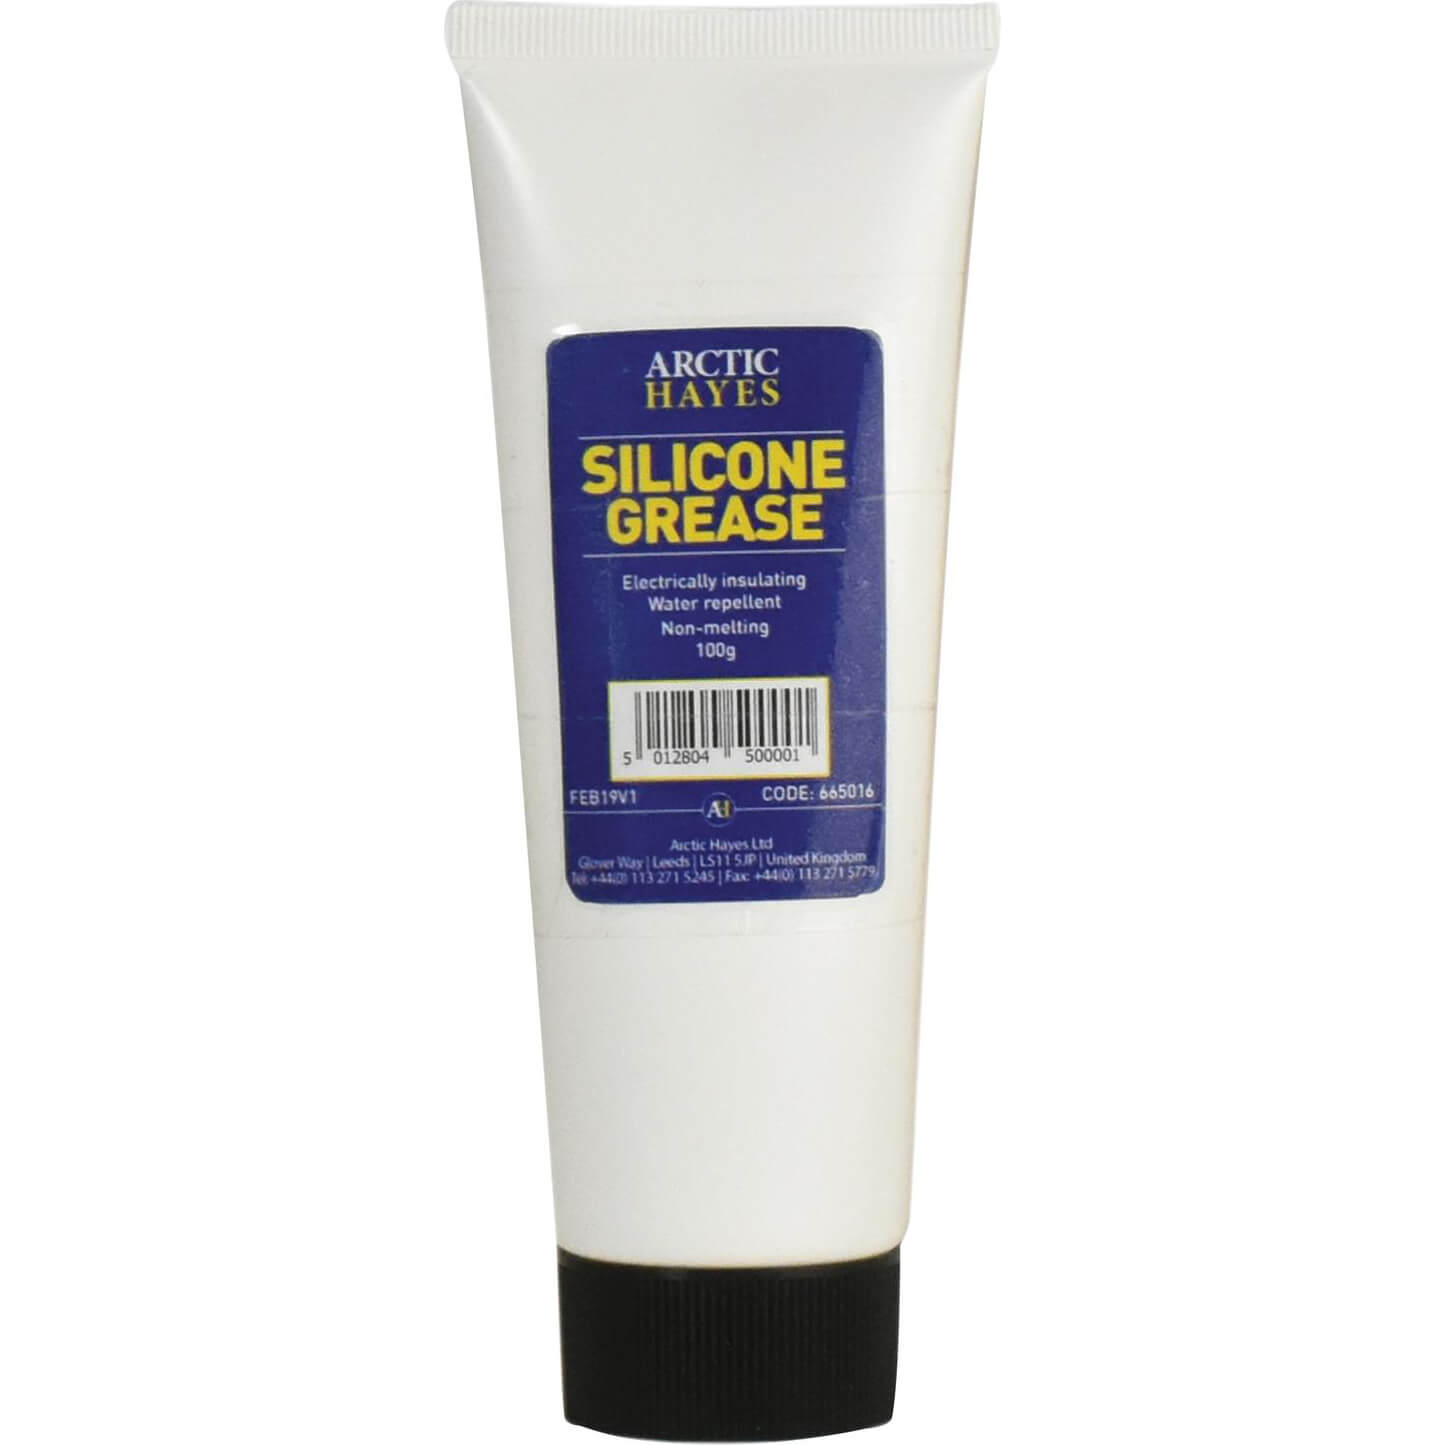 Image of Arctic Hayes Silicone Grease 100g